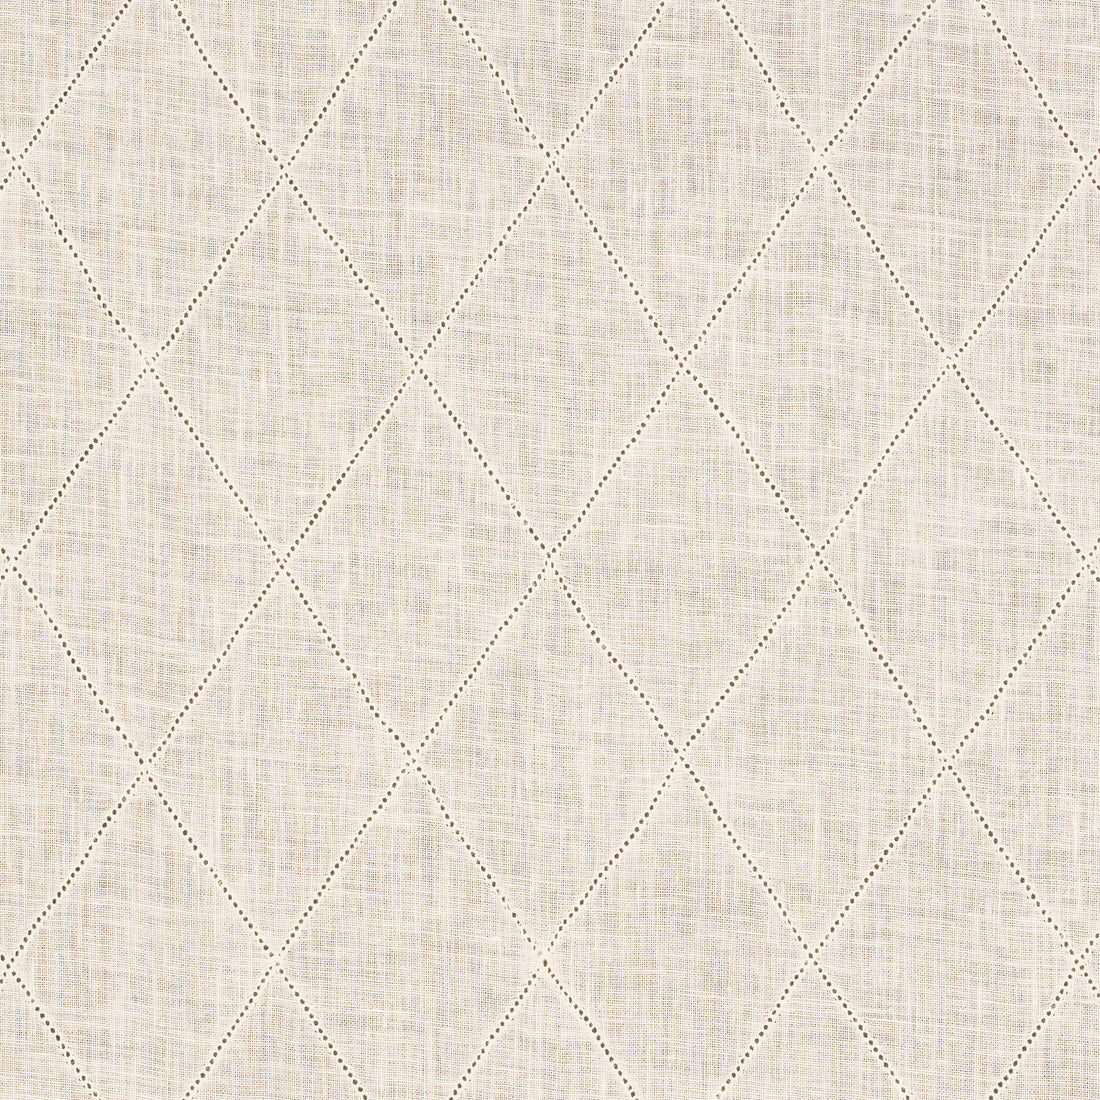 Claremont Trellis fabric in ivory color - pattern number W772588 - by Thibaut in the Chestnut Hill collection